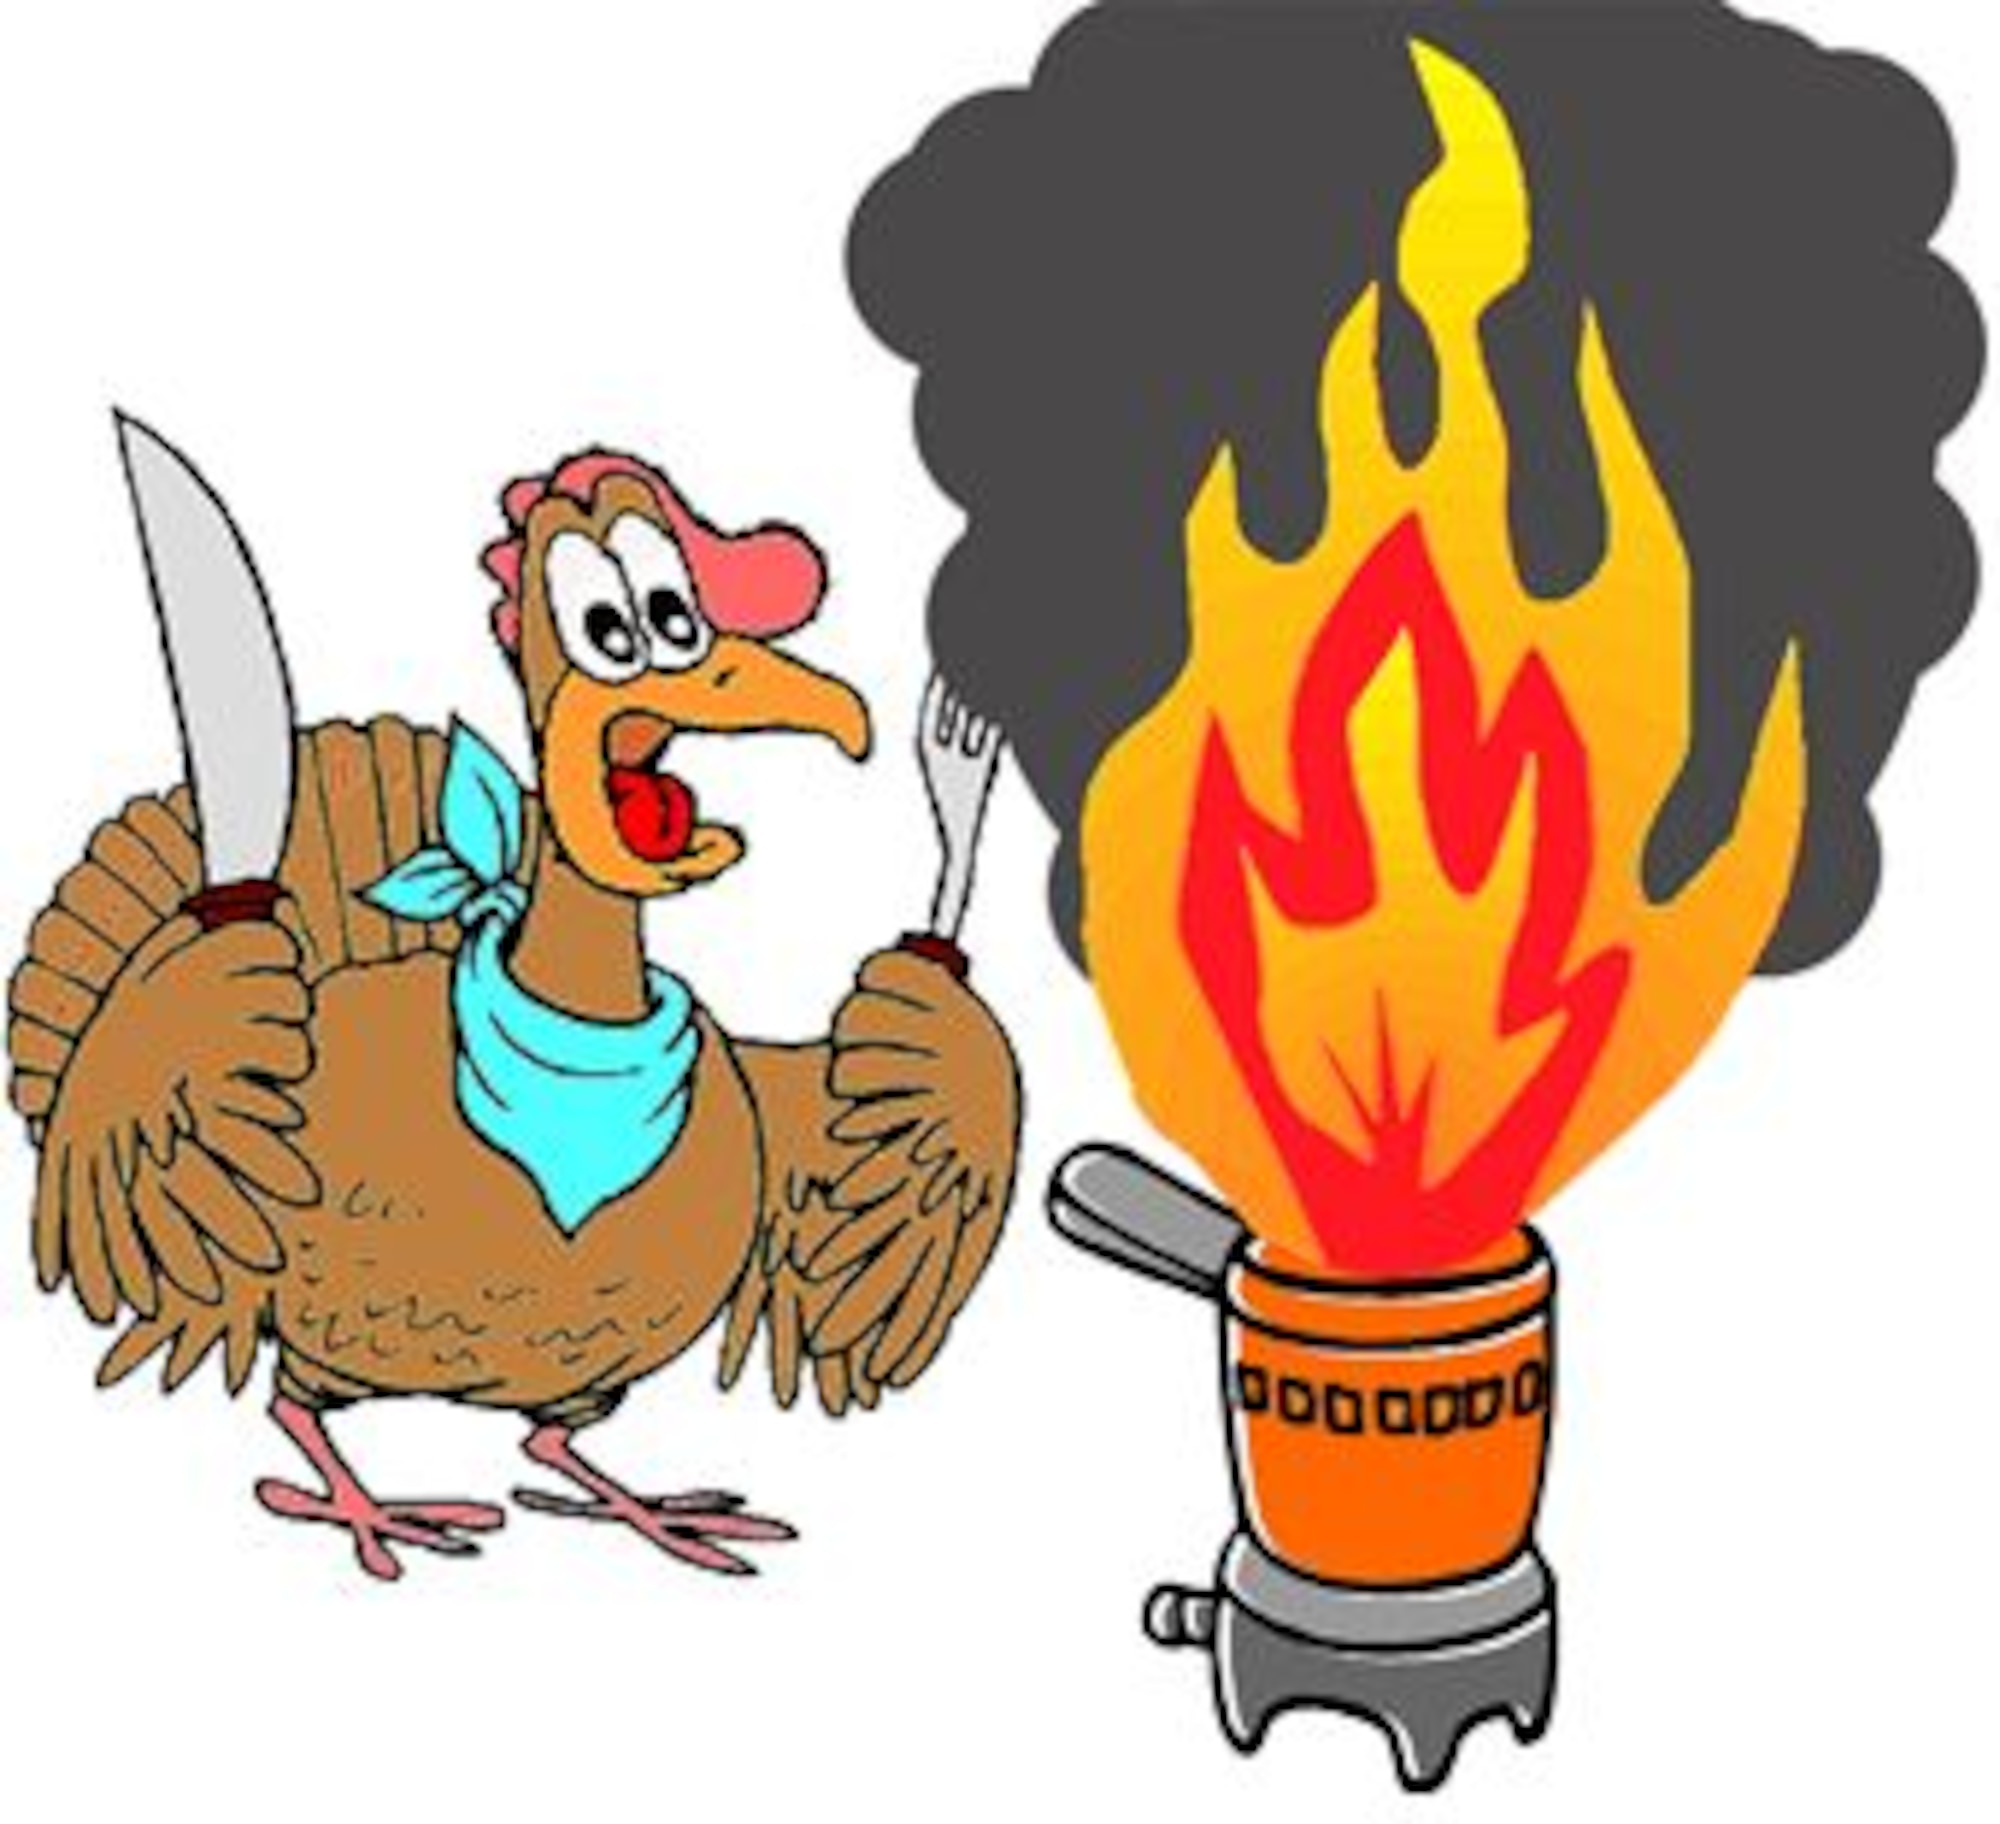 Thanksgiving safety tips for deep-frying a turkey without setting